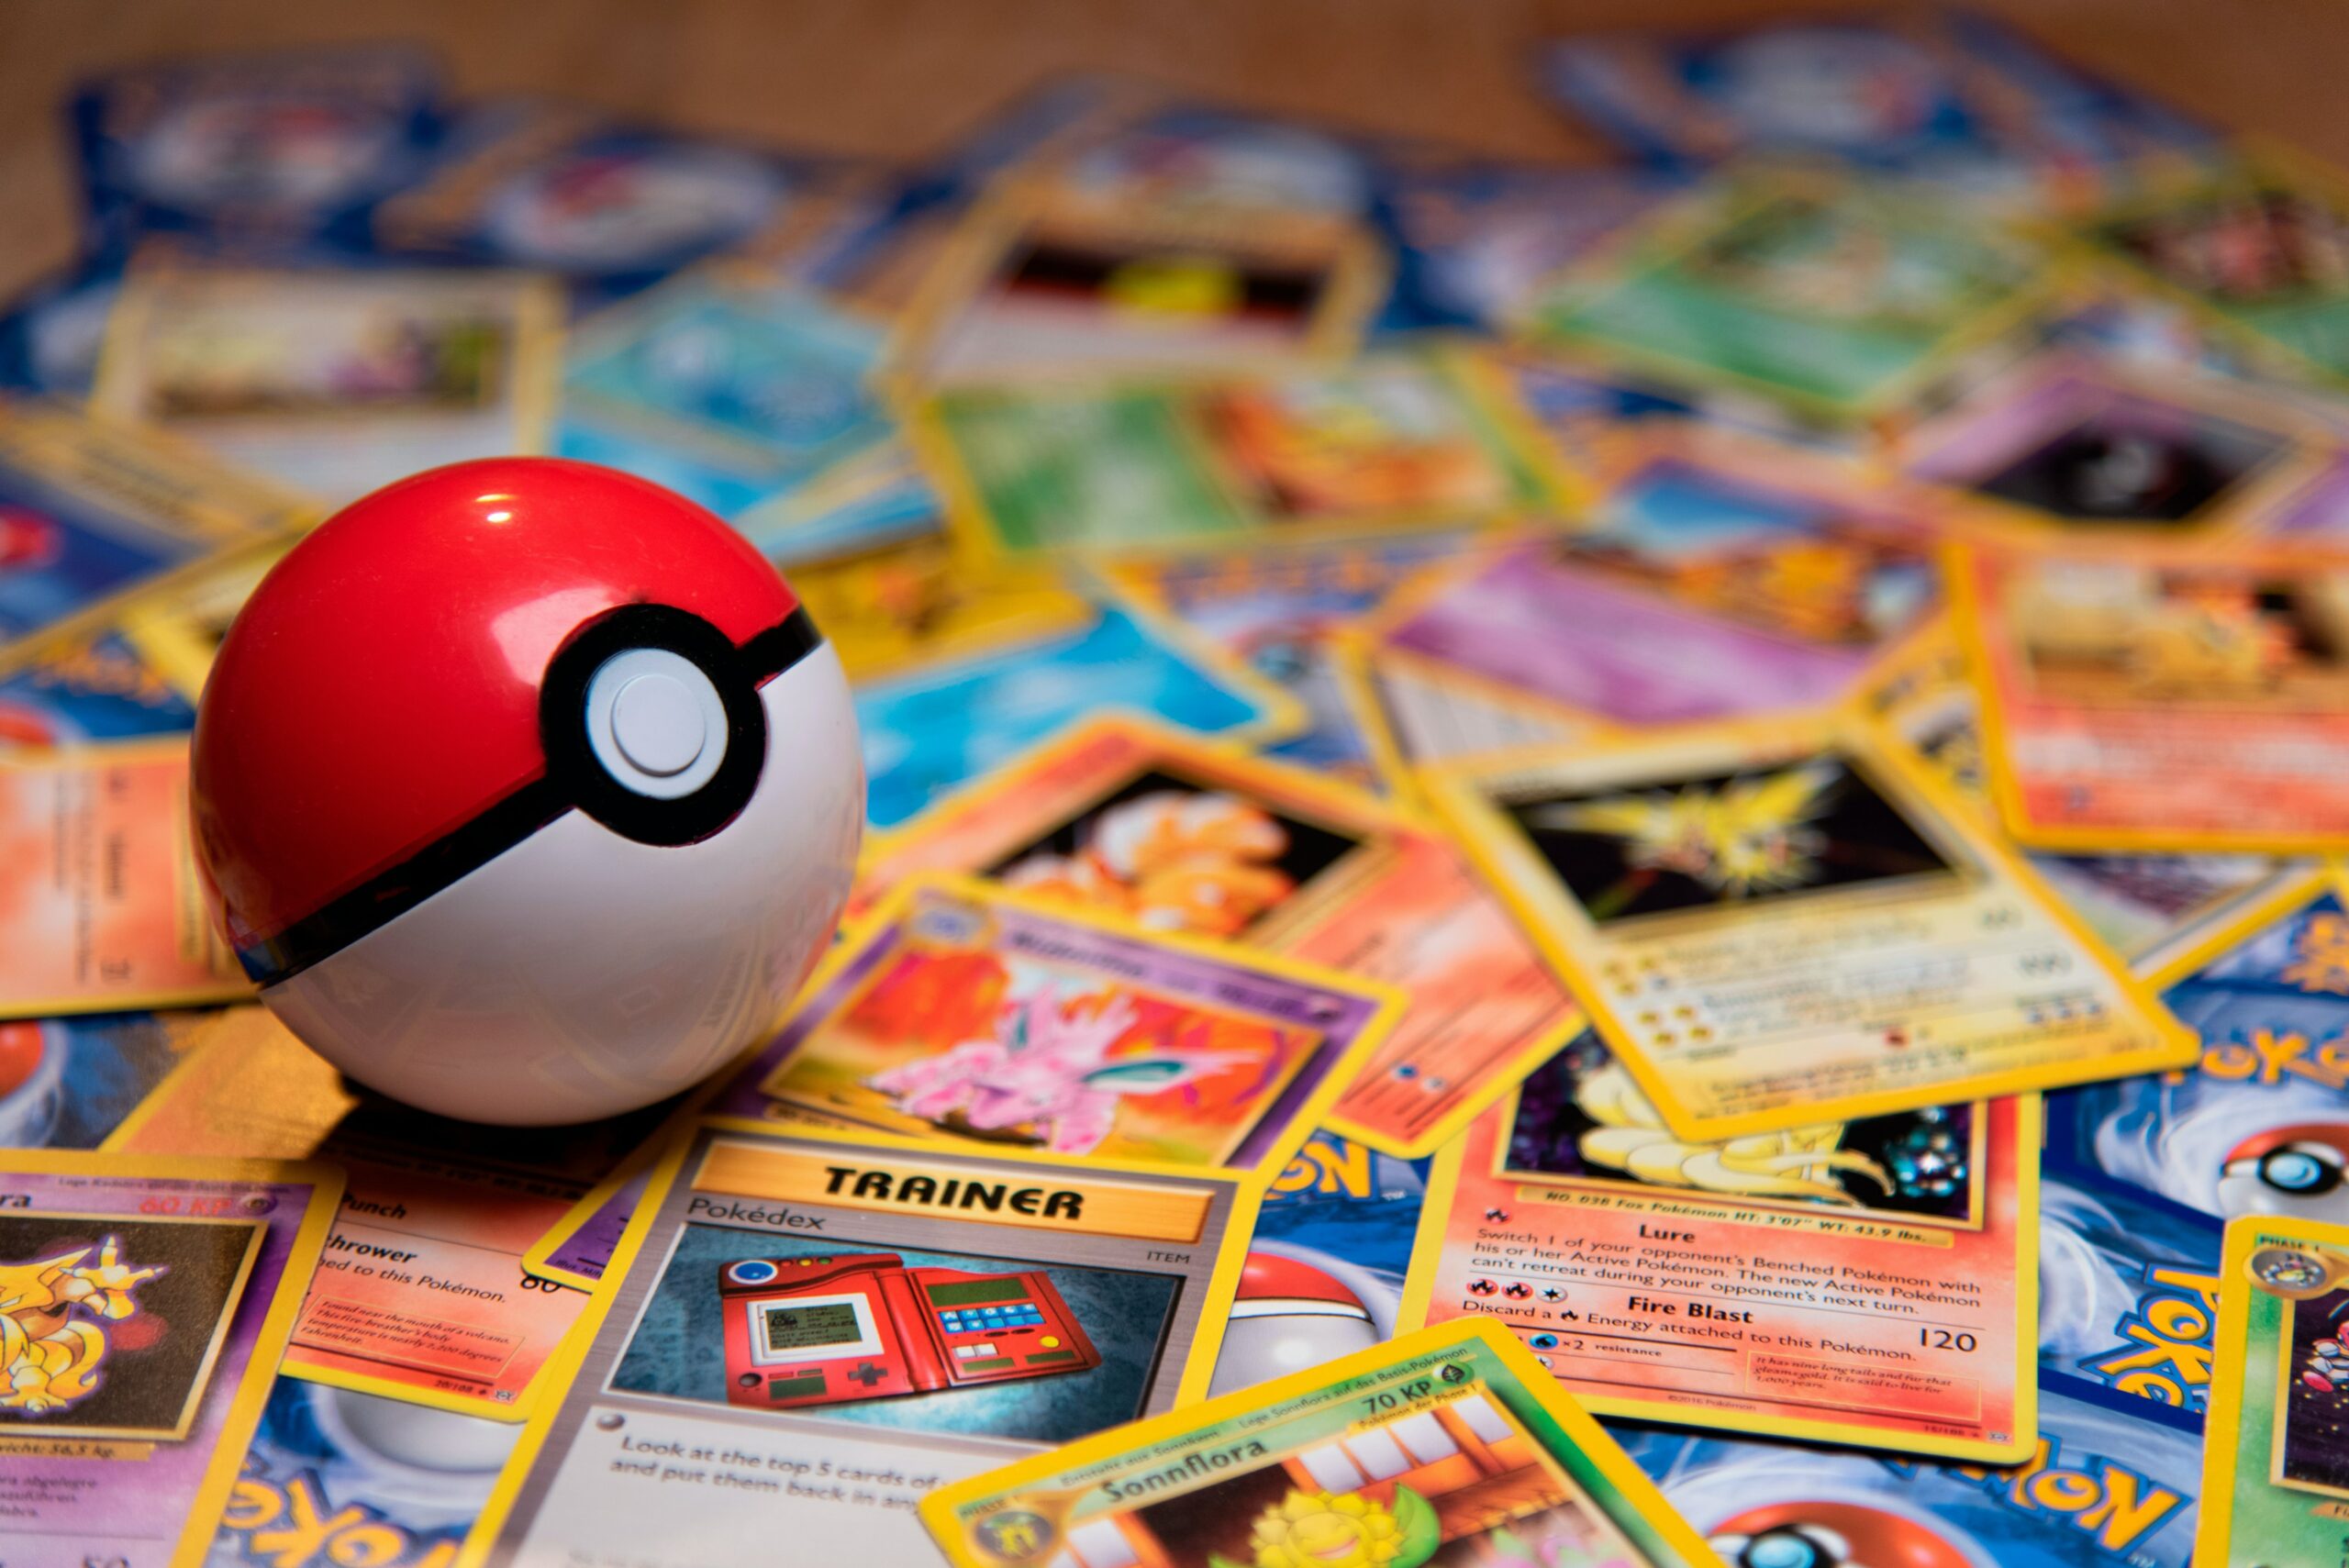 What Are The 11 Types Of Pokemon Cards?